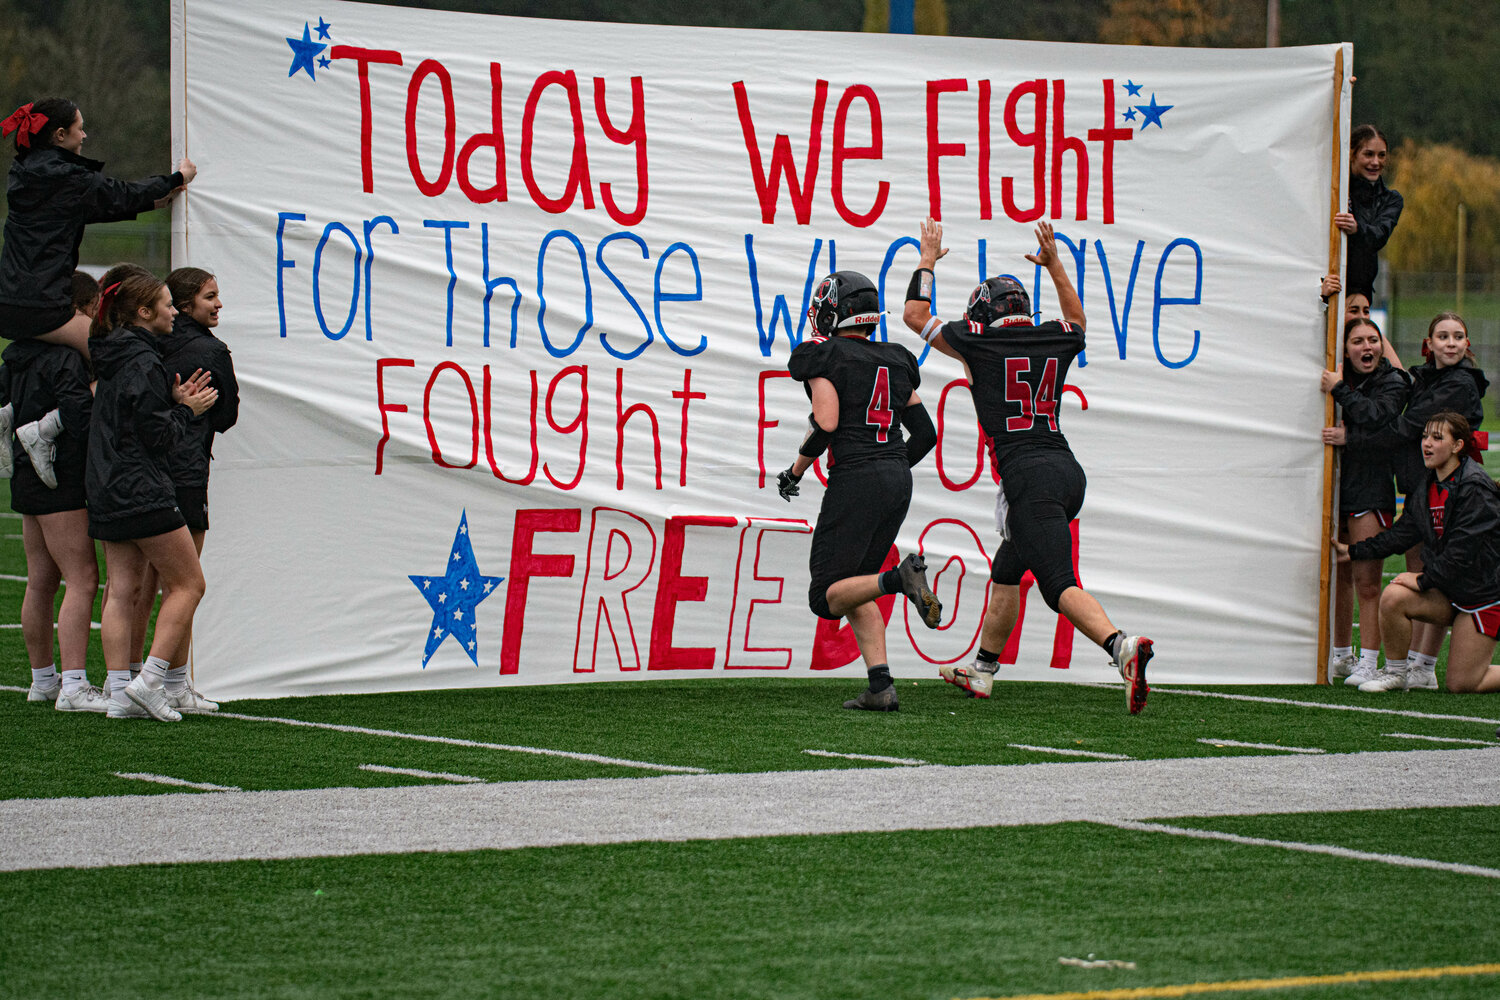 The Toledo football team takes the field by running through a veterans day themed banner  during a 21-12 win over Tri Cities Prep Nov. 11.